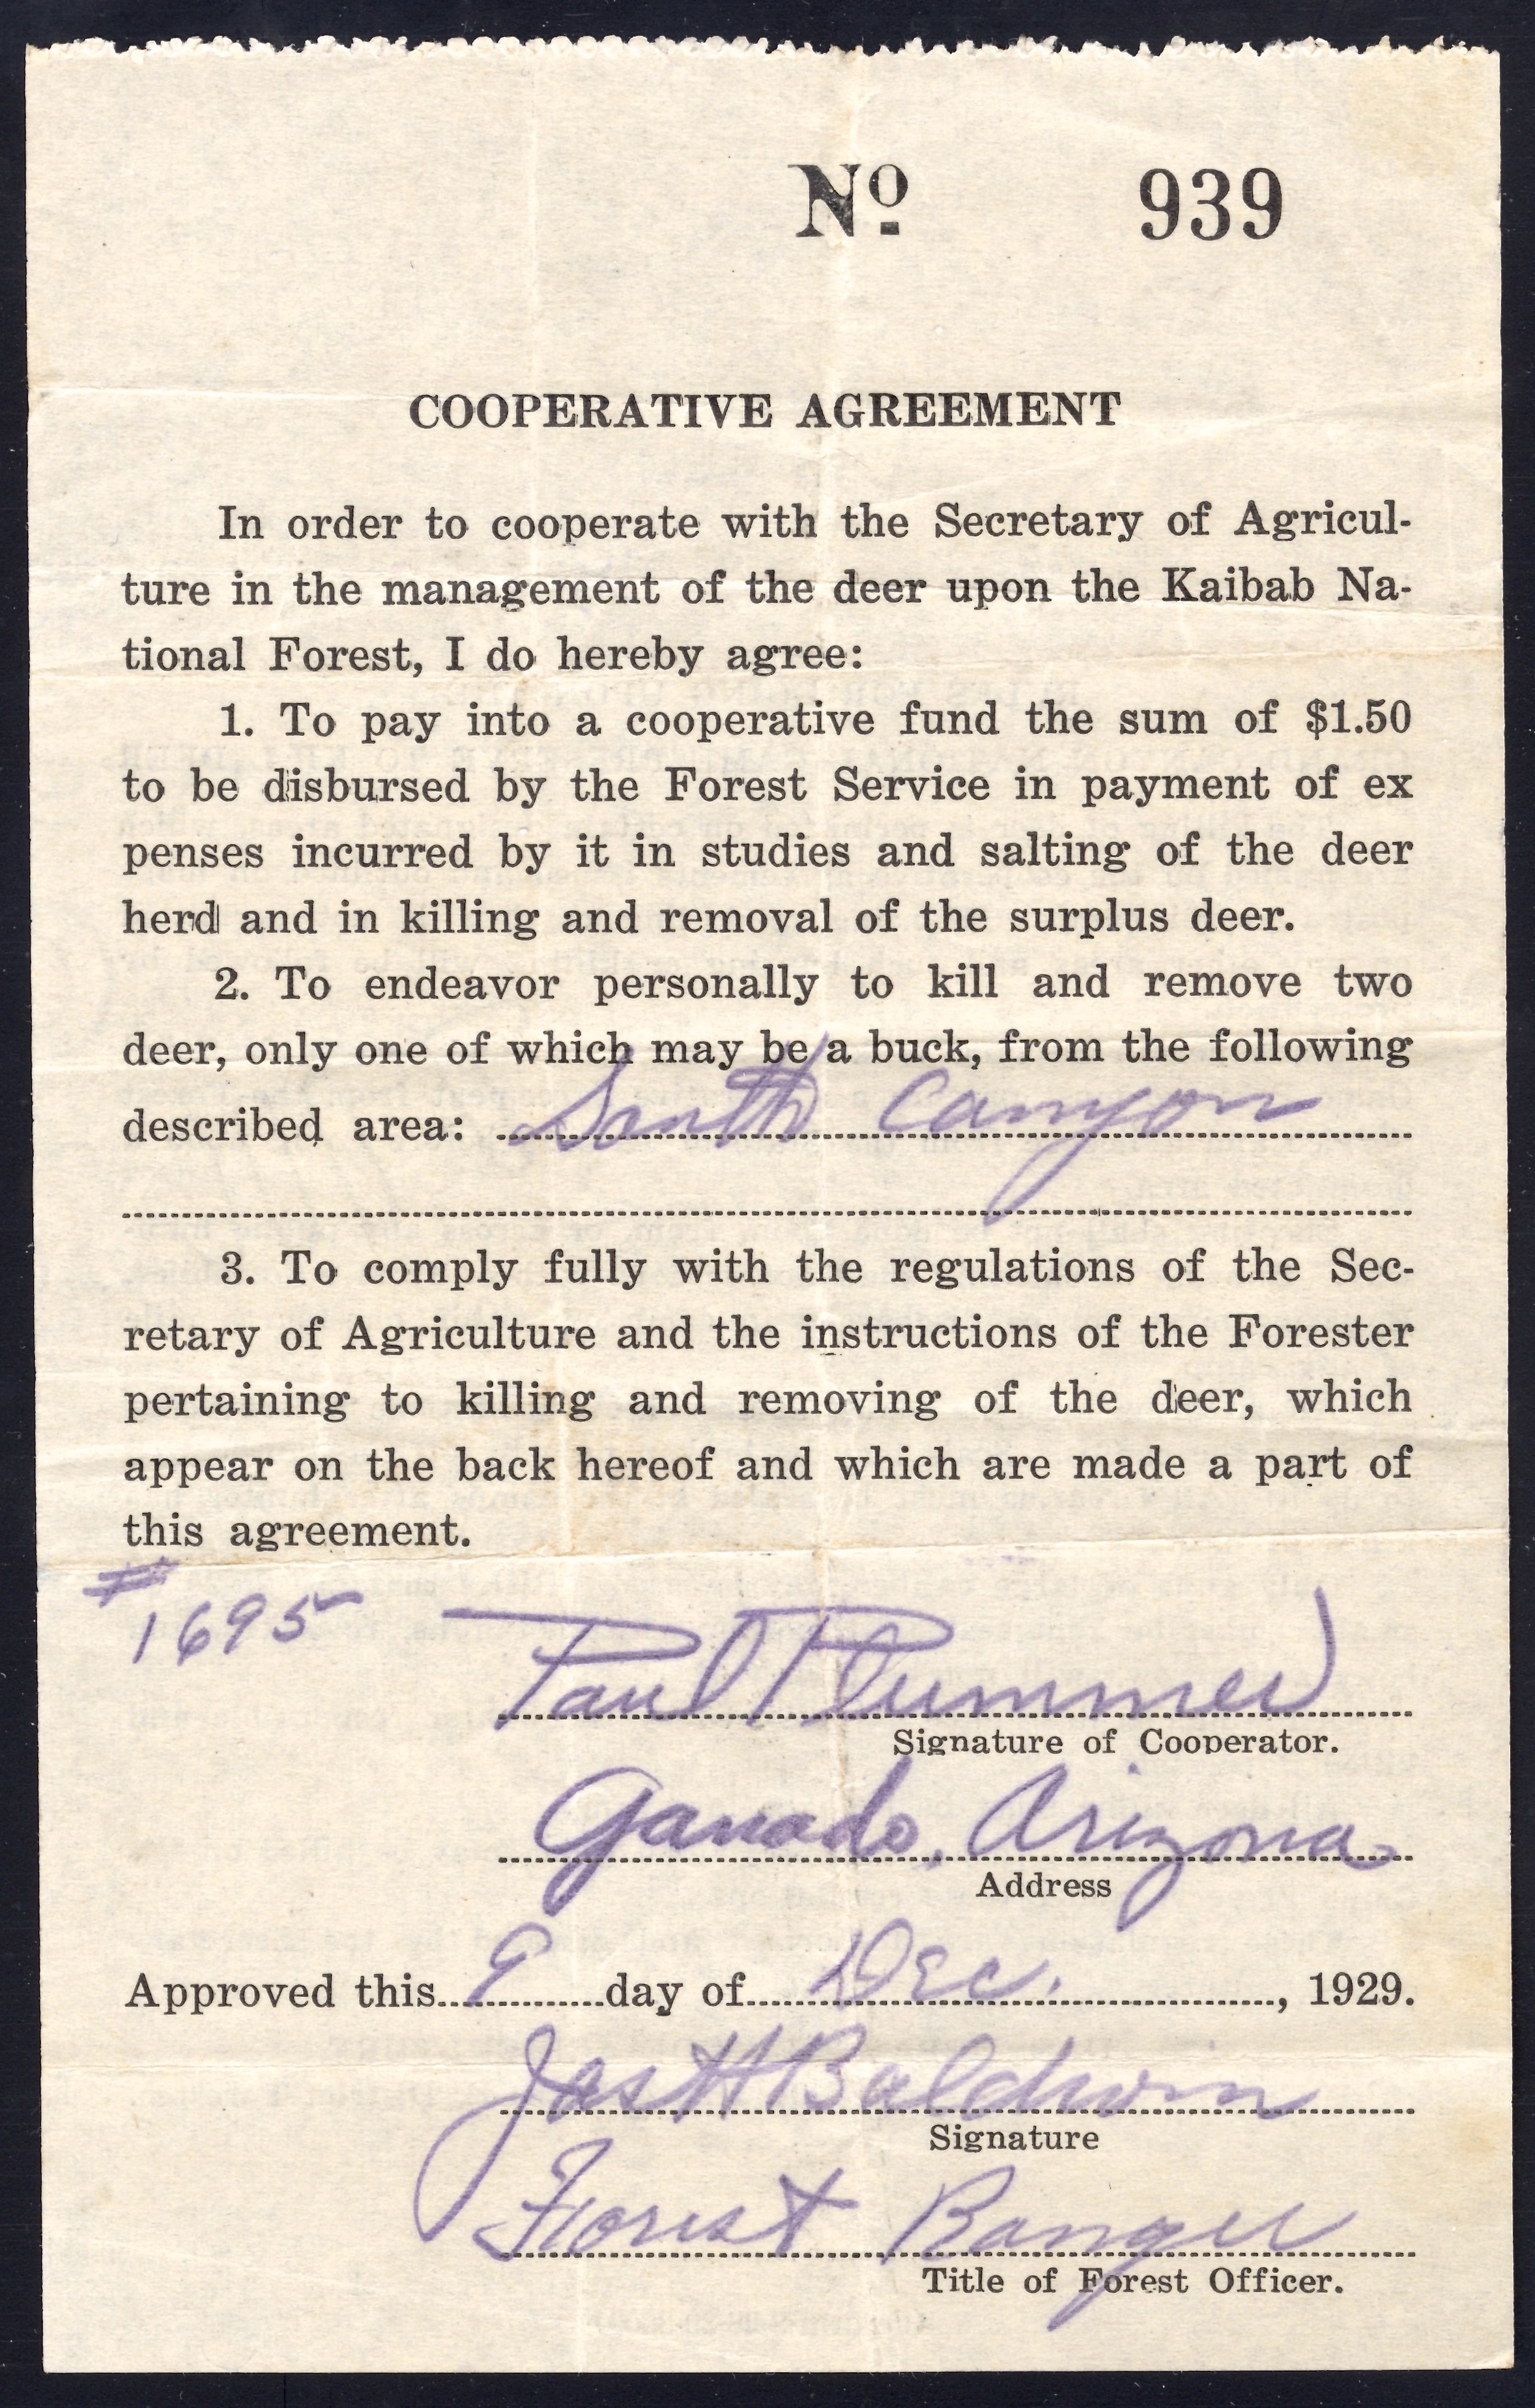 1929 Cooperative Agreement to hunt in the Grand Canyon